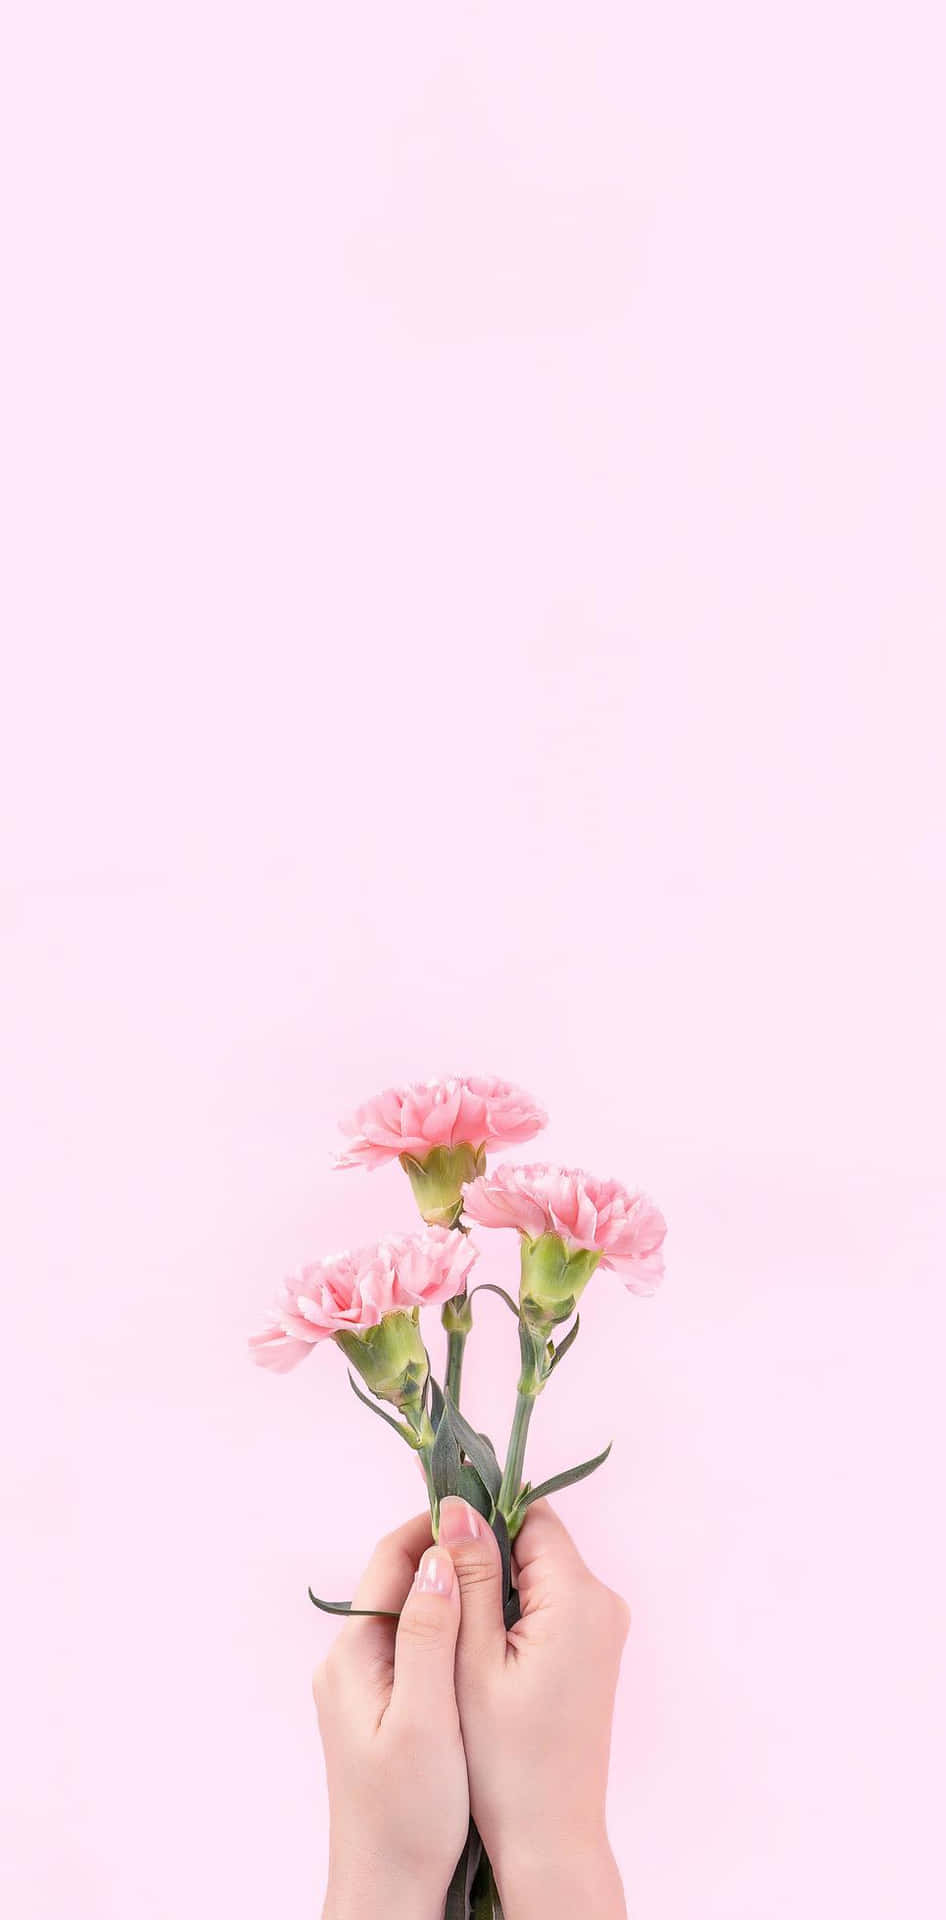 A pair of hands holding a small bouquet of pink carnations against a pale pink background - Pink, soft pink